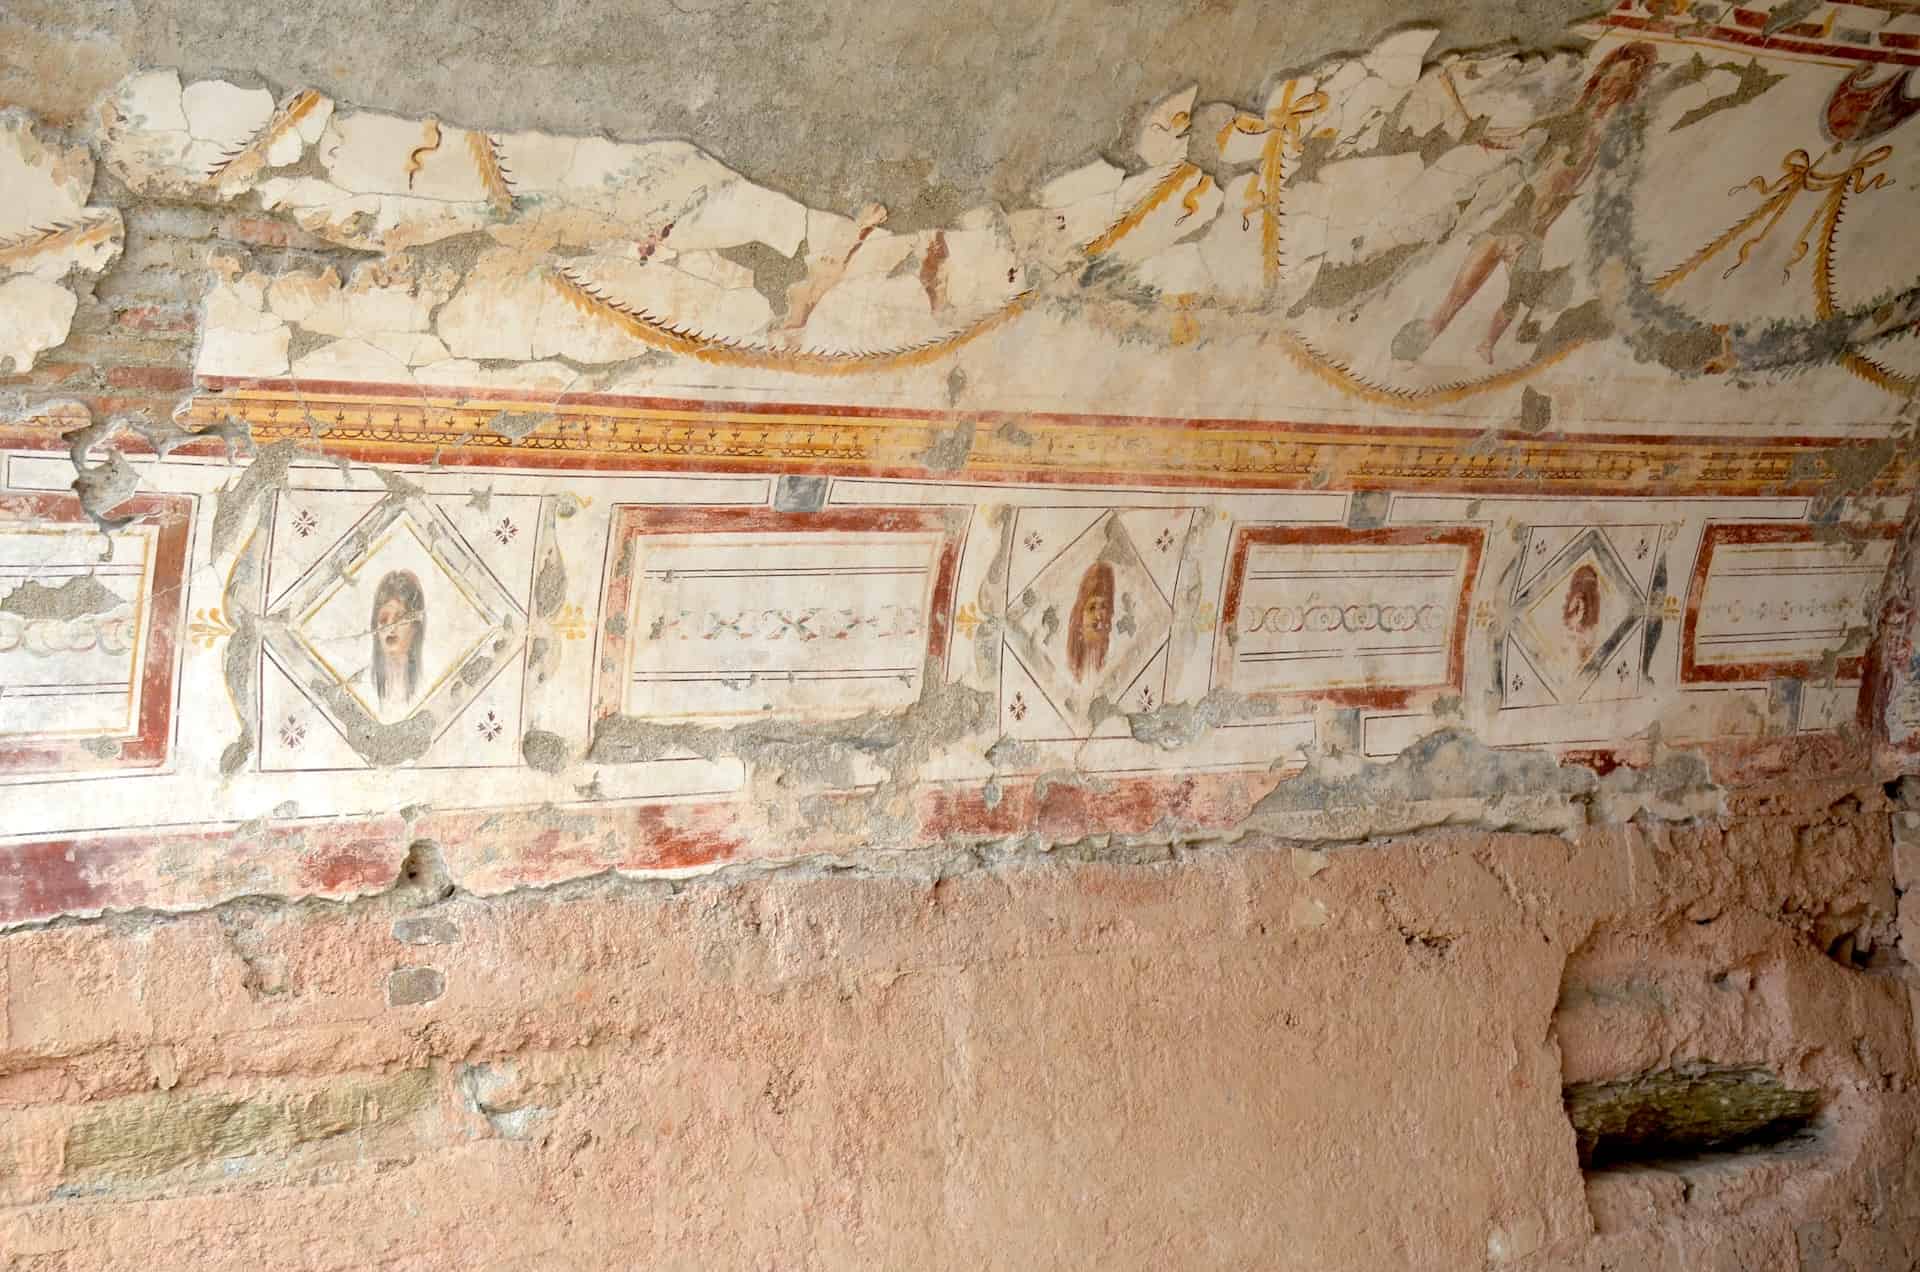 Frescoes in the Stucco Room of Dwelling Unit 6 in the Terrace Houses at Ephesus